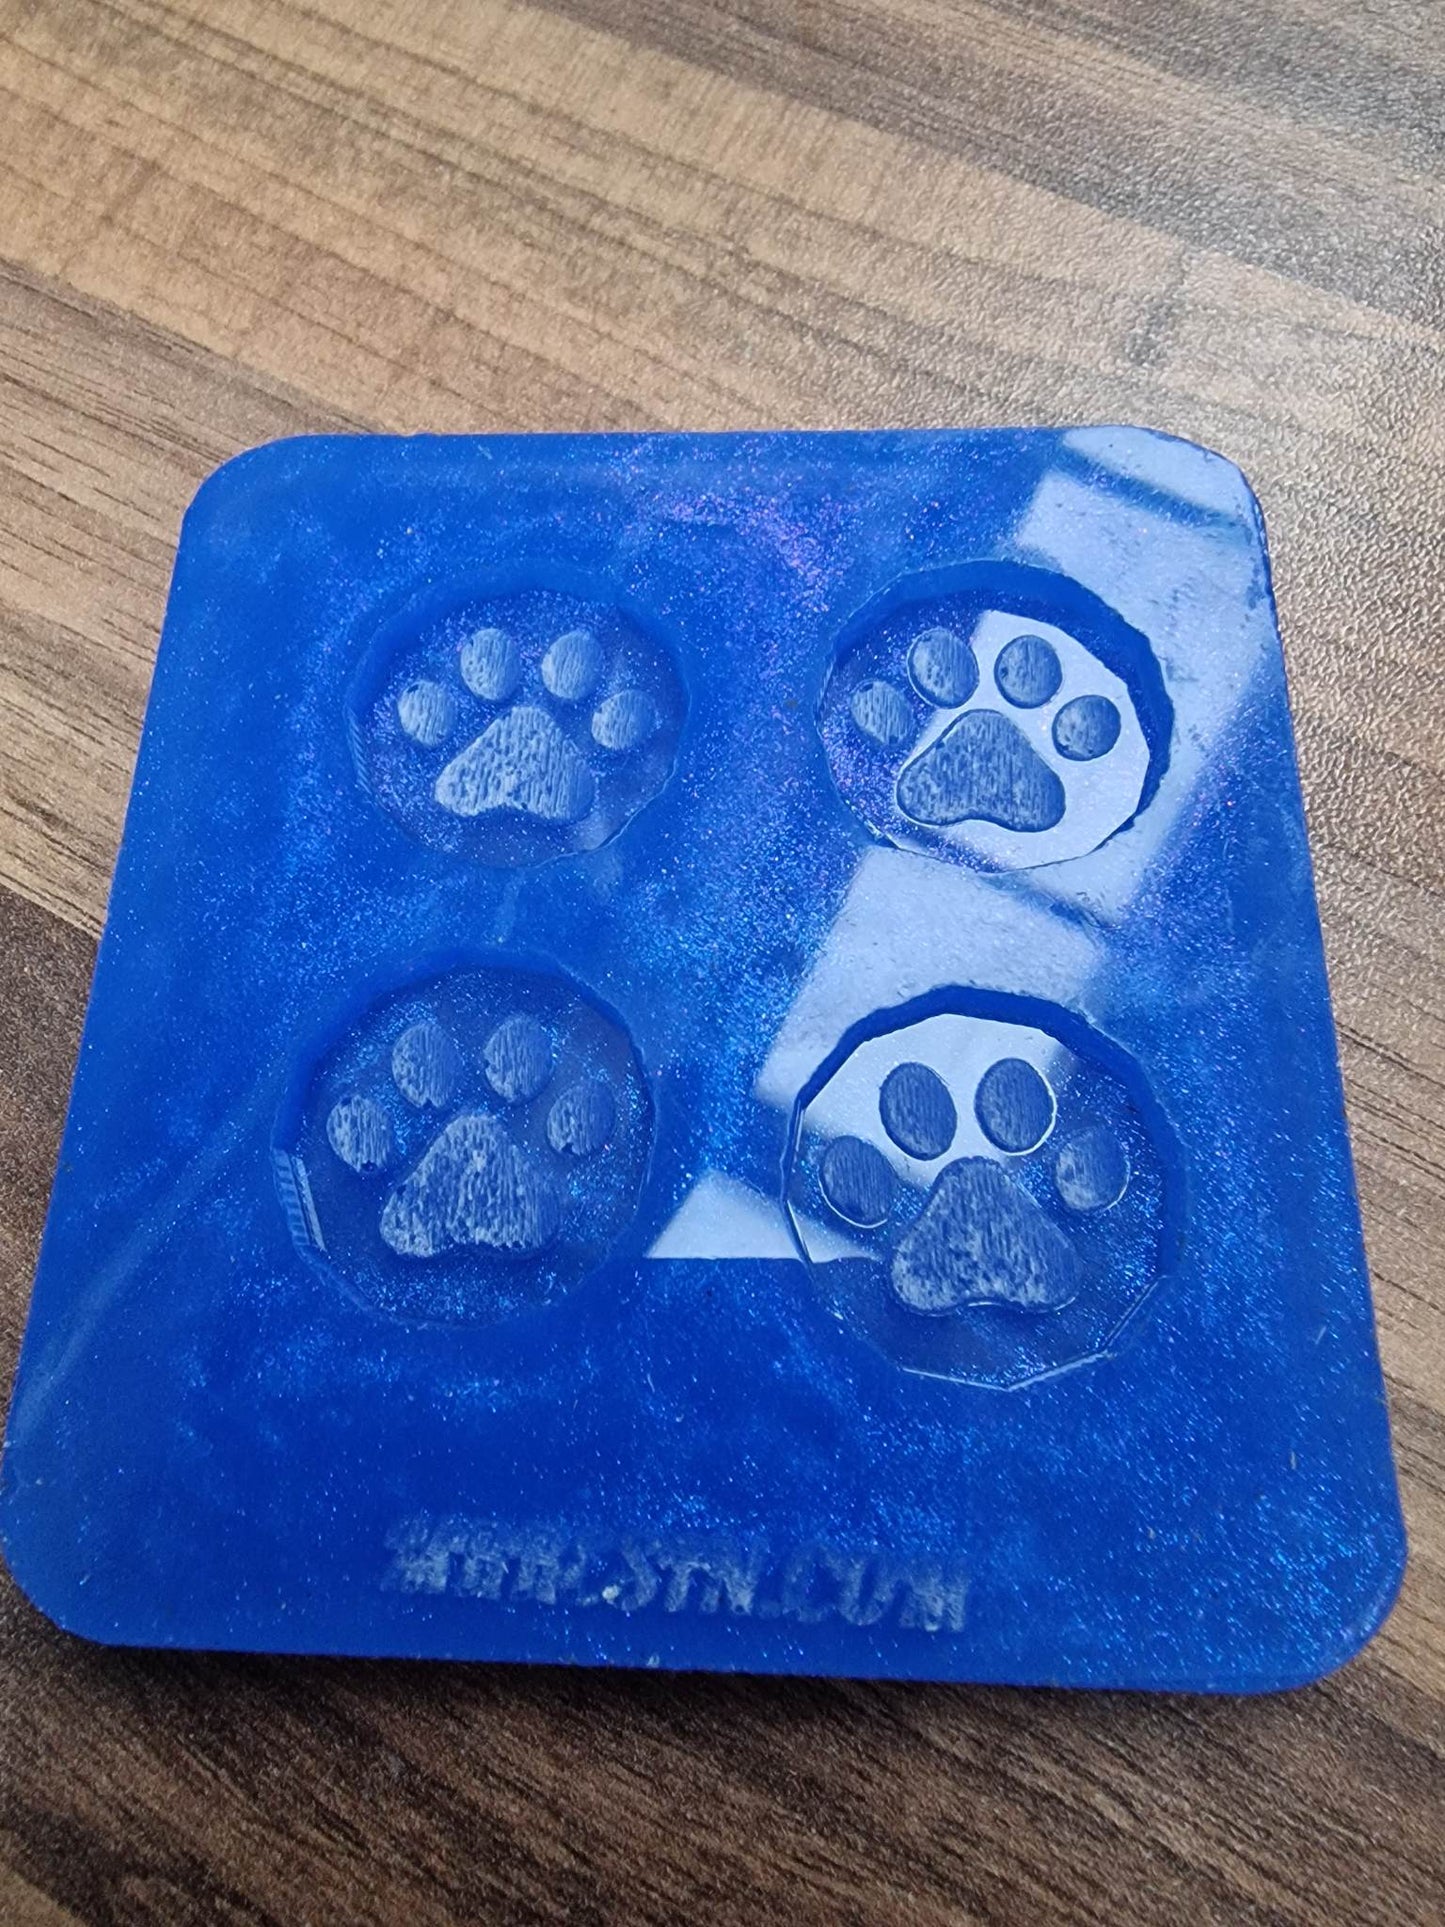 Trolley Token Silicone Mould